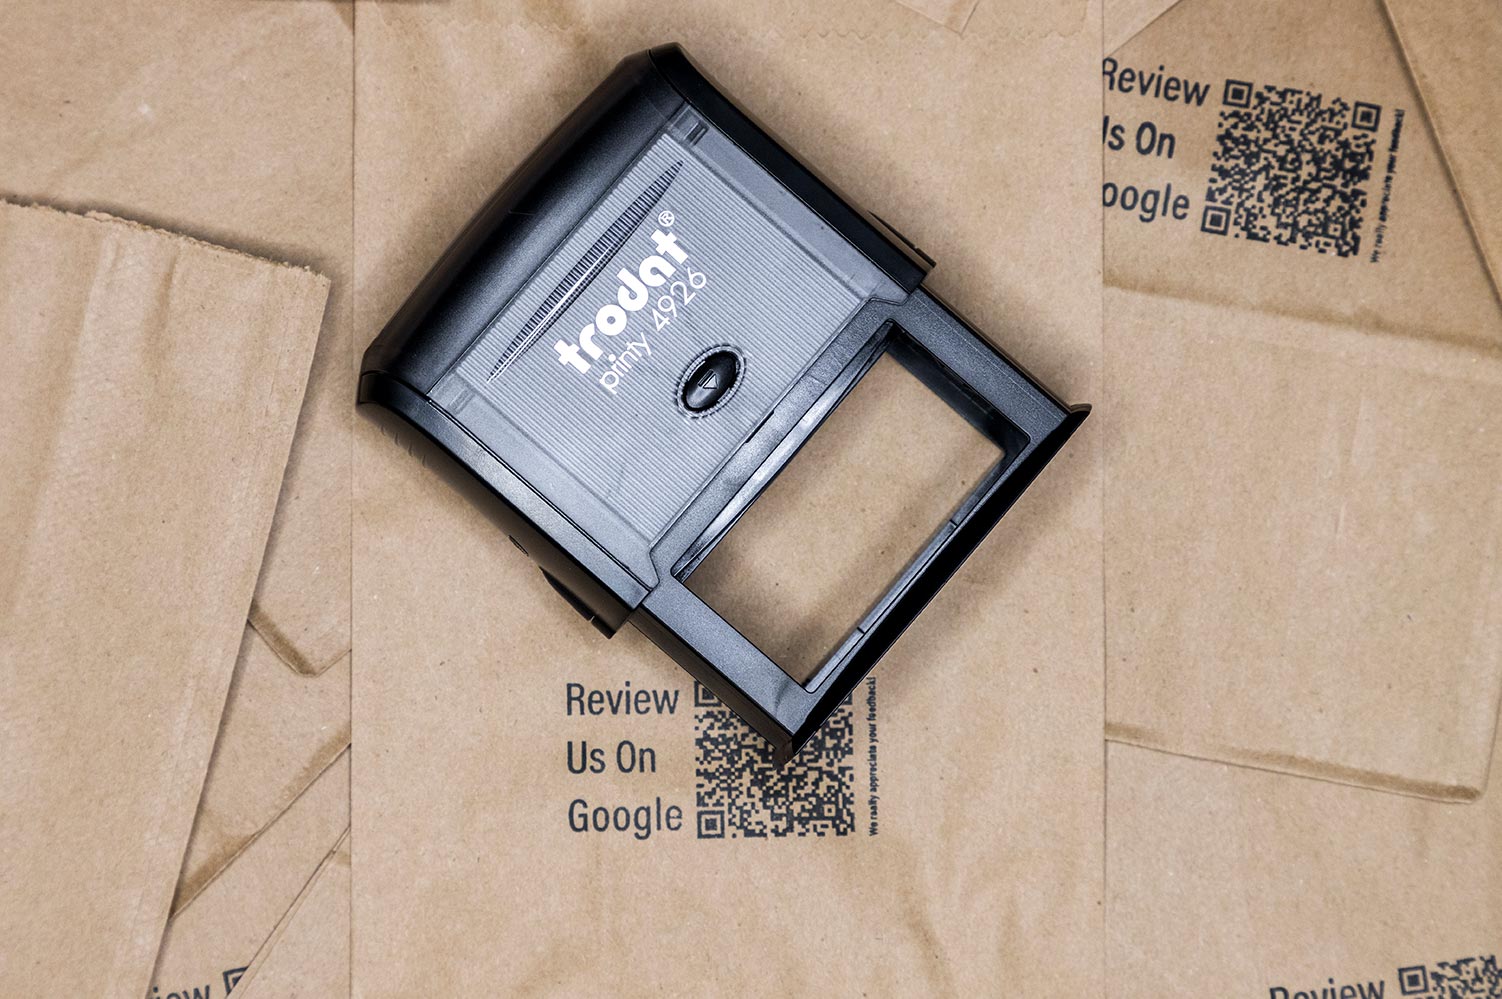 using rubber stamps on your product packaging